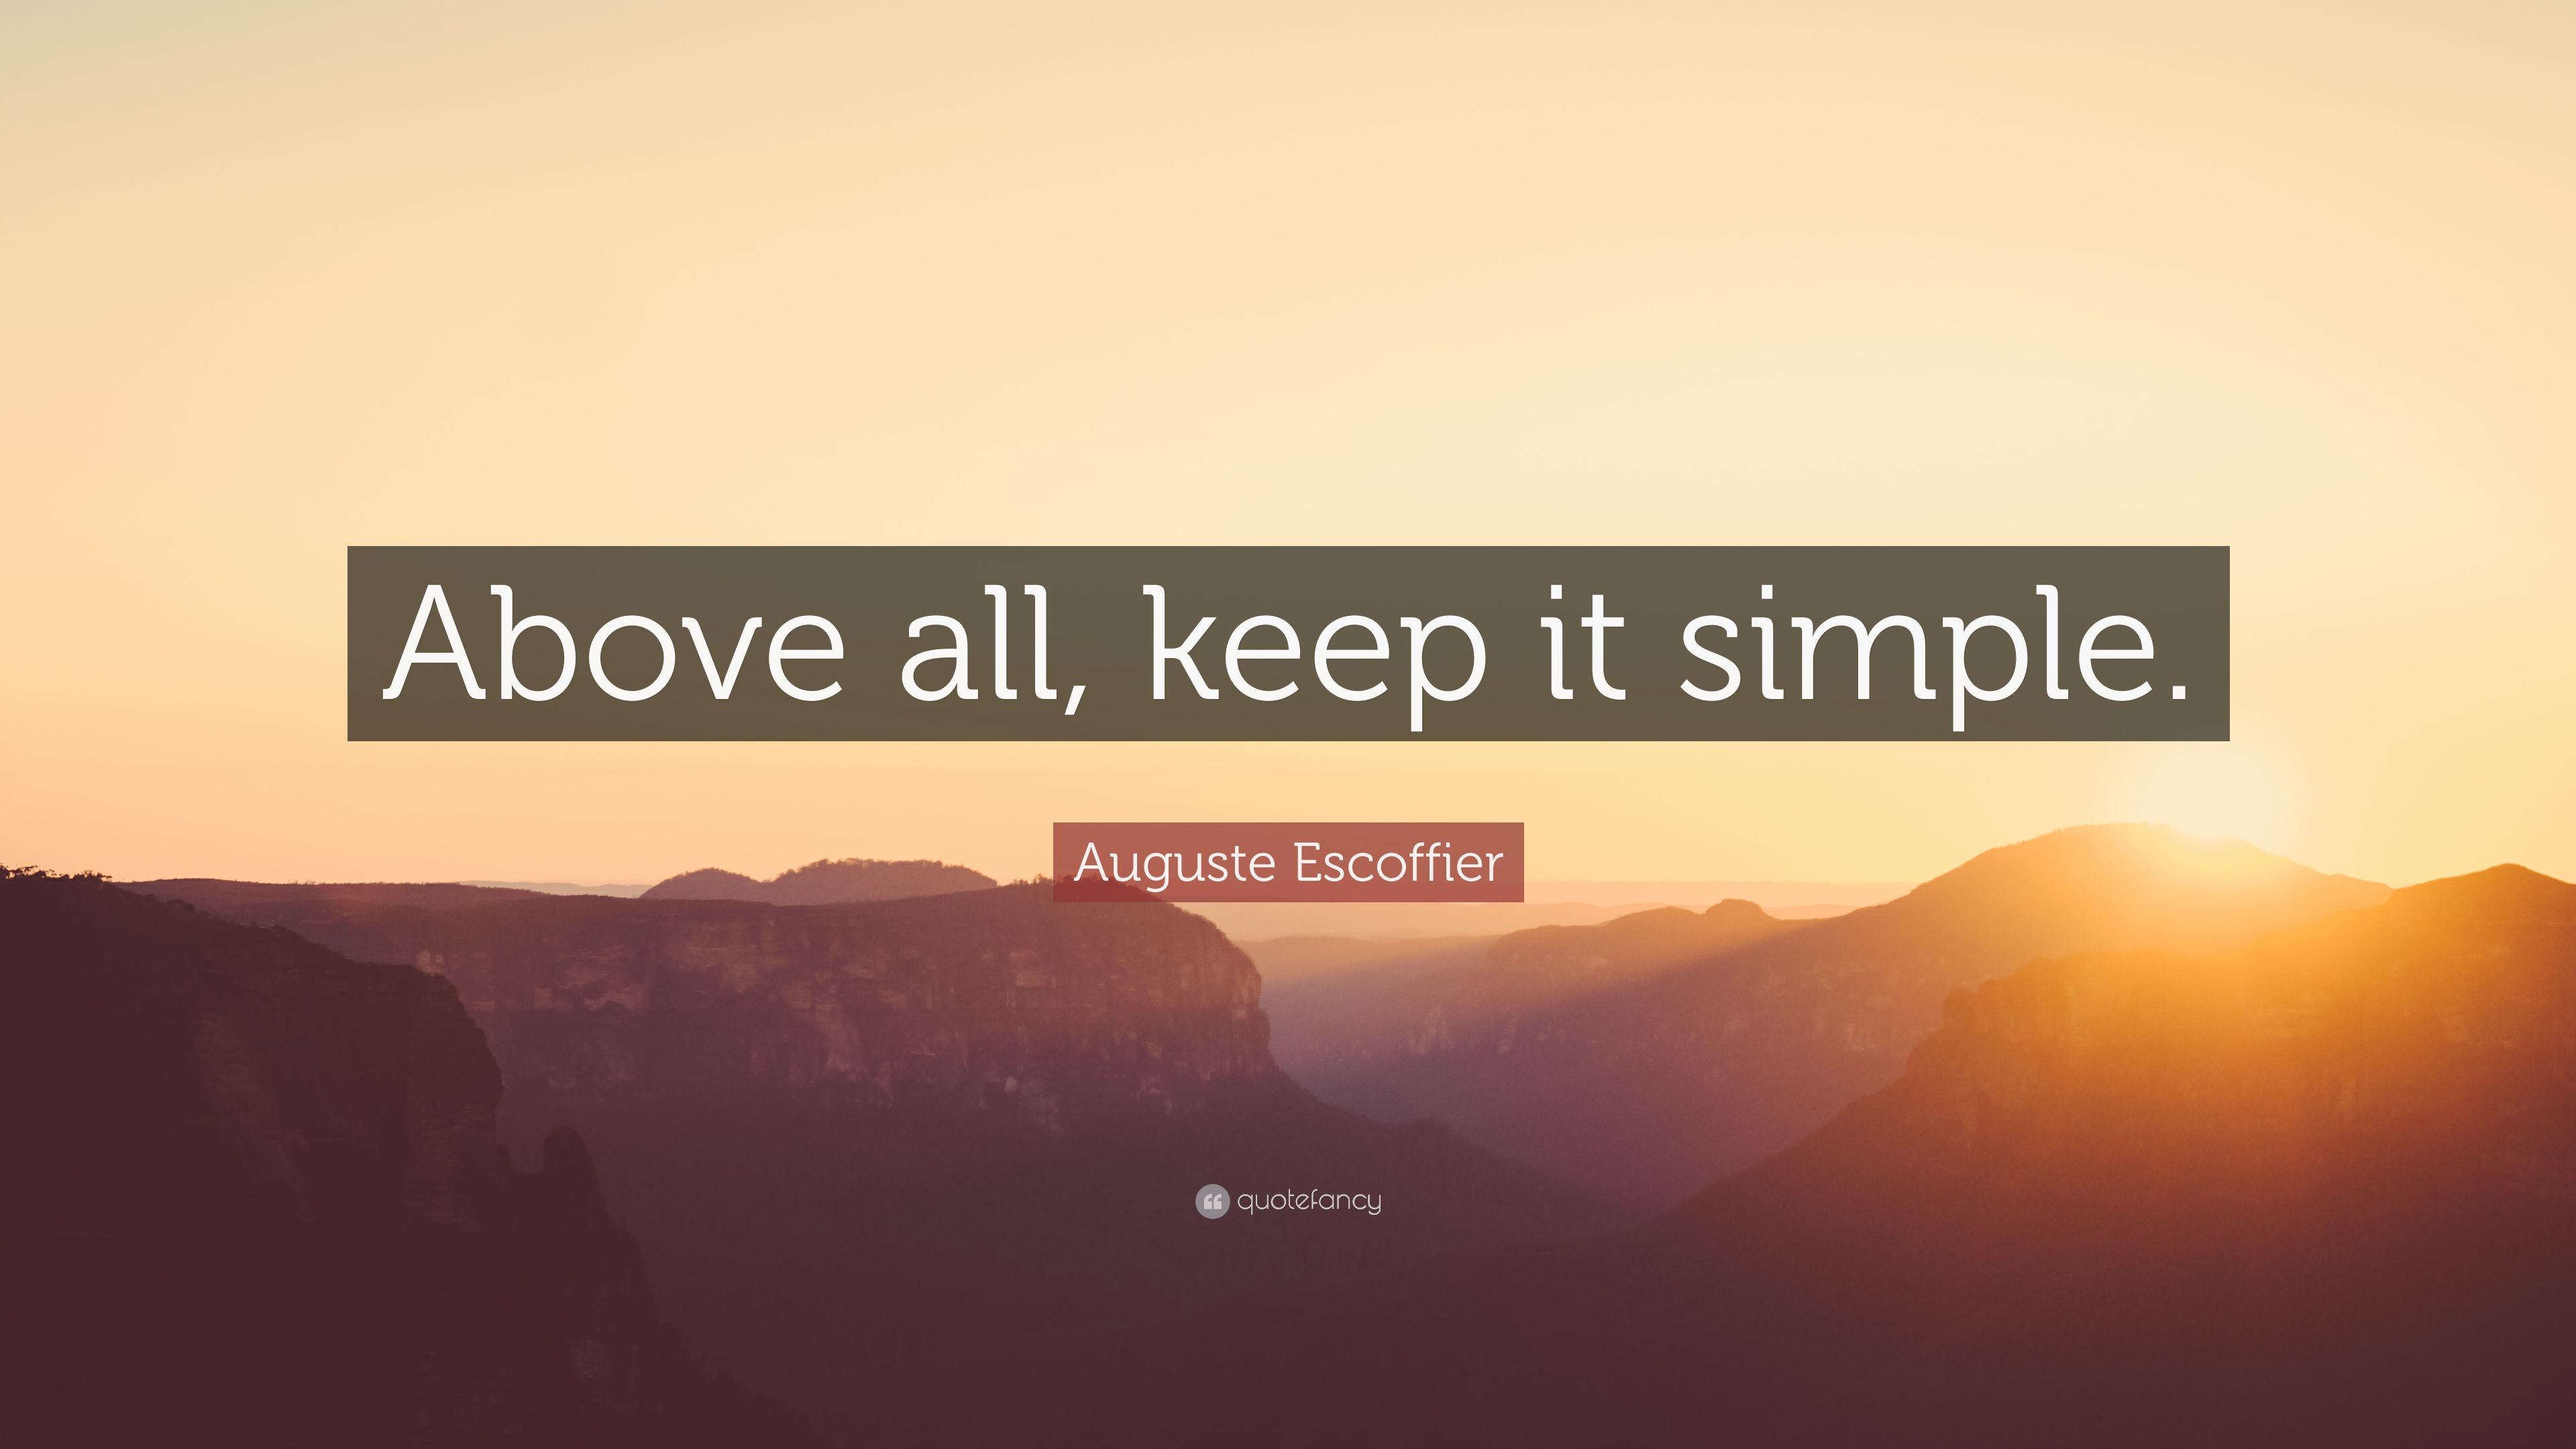 Auguste Escoffier Quote: “Above all, keep it simple.” (12 wallpaper)